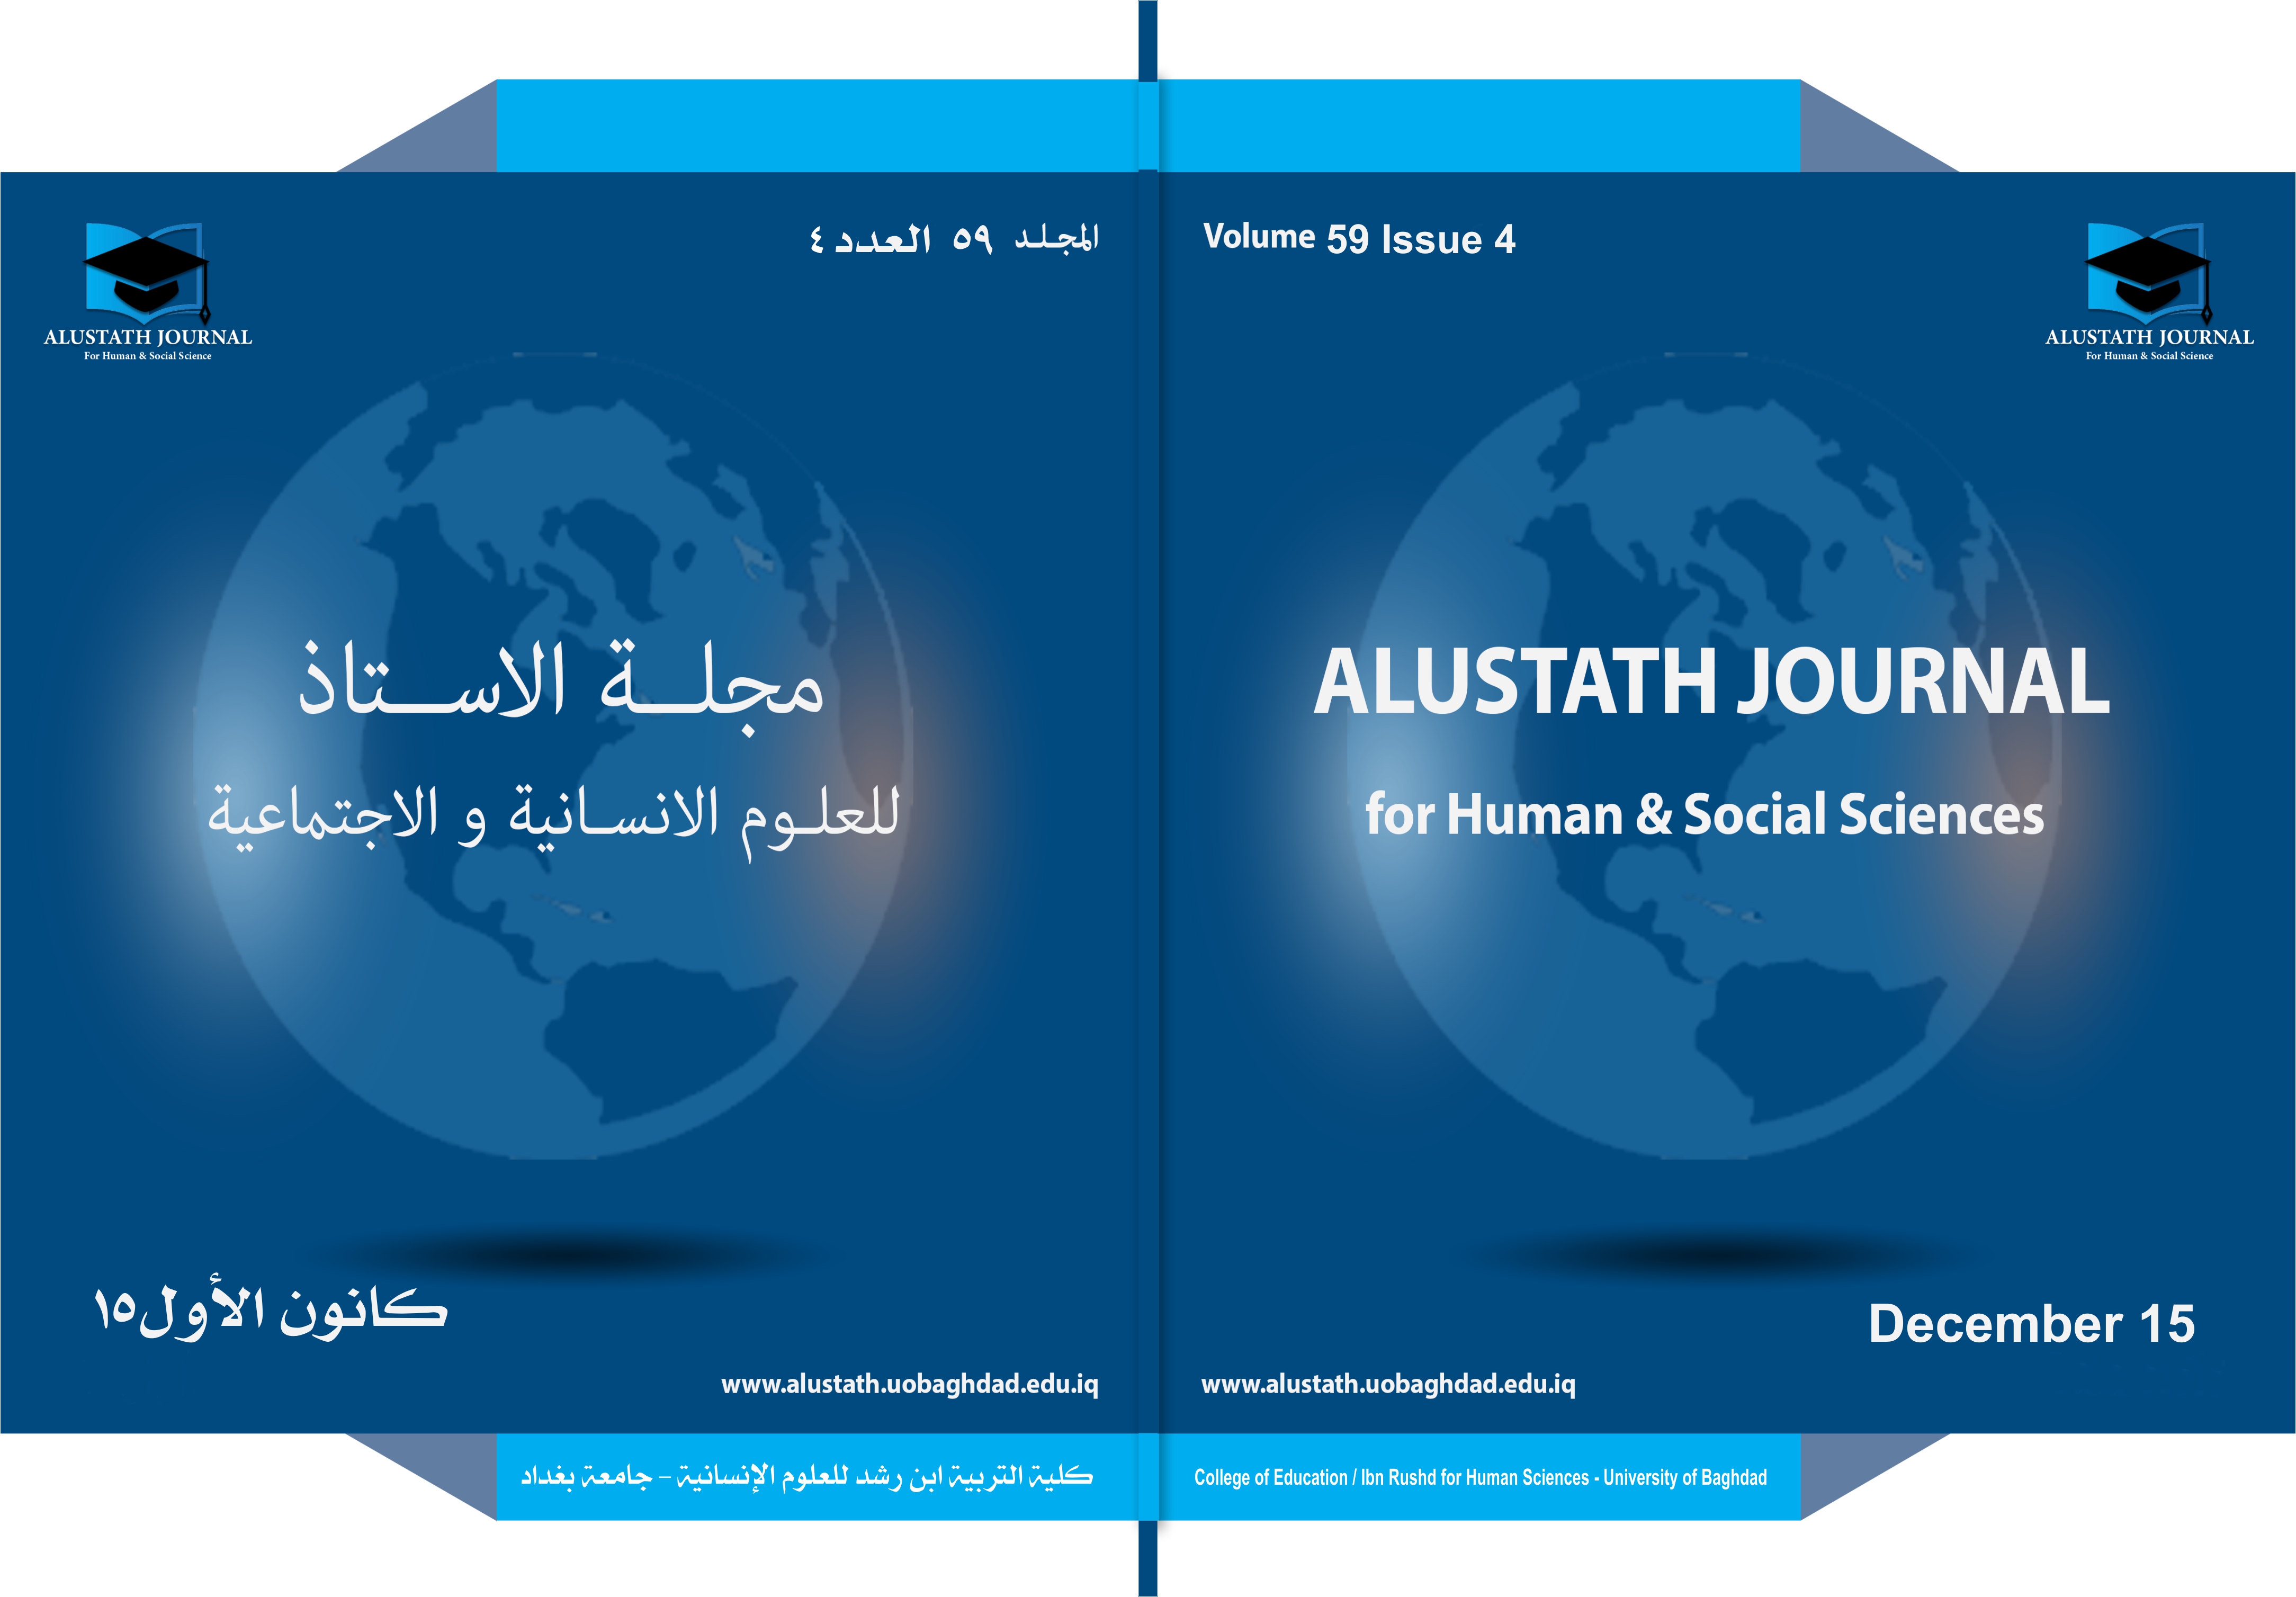 					View Vol. 59 No. 4 (2020): Alustath Journal for Human and Social Sciences 
				